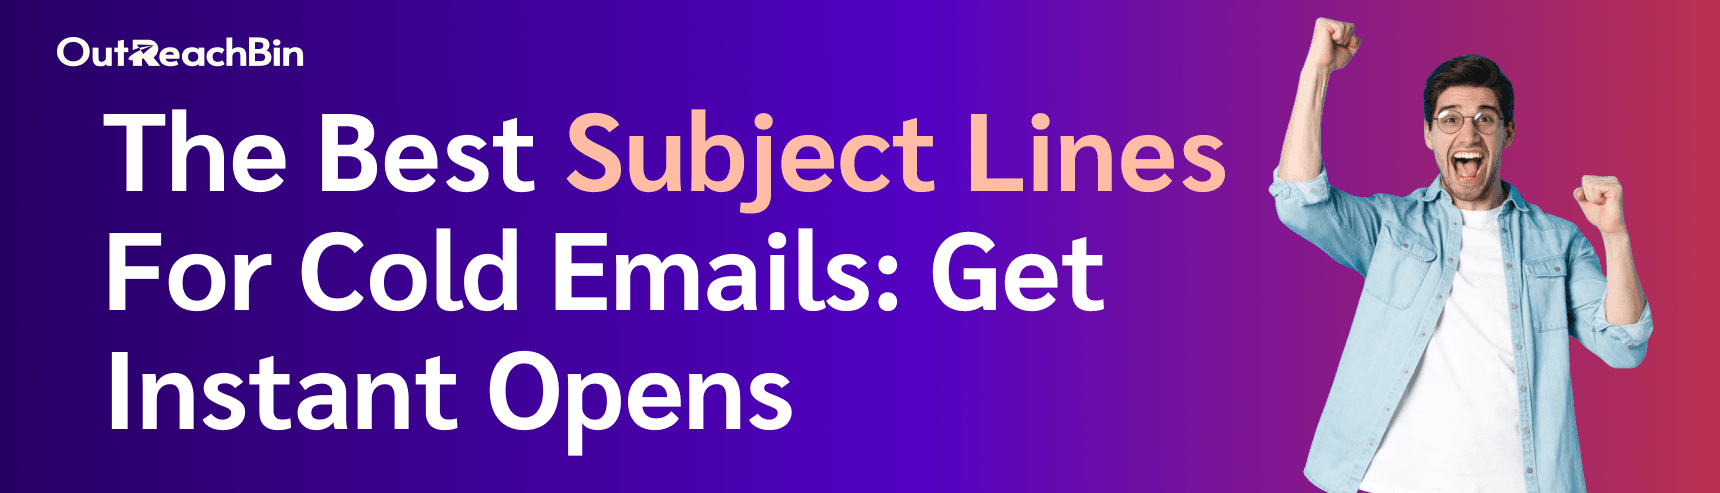 The Best Subject Lines For Cold Emails: Get Instant Opens cover